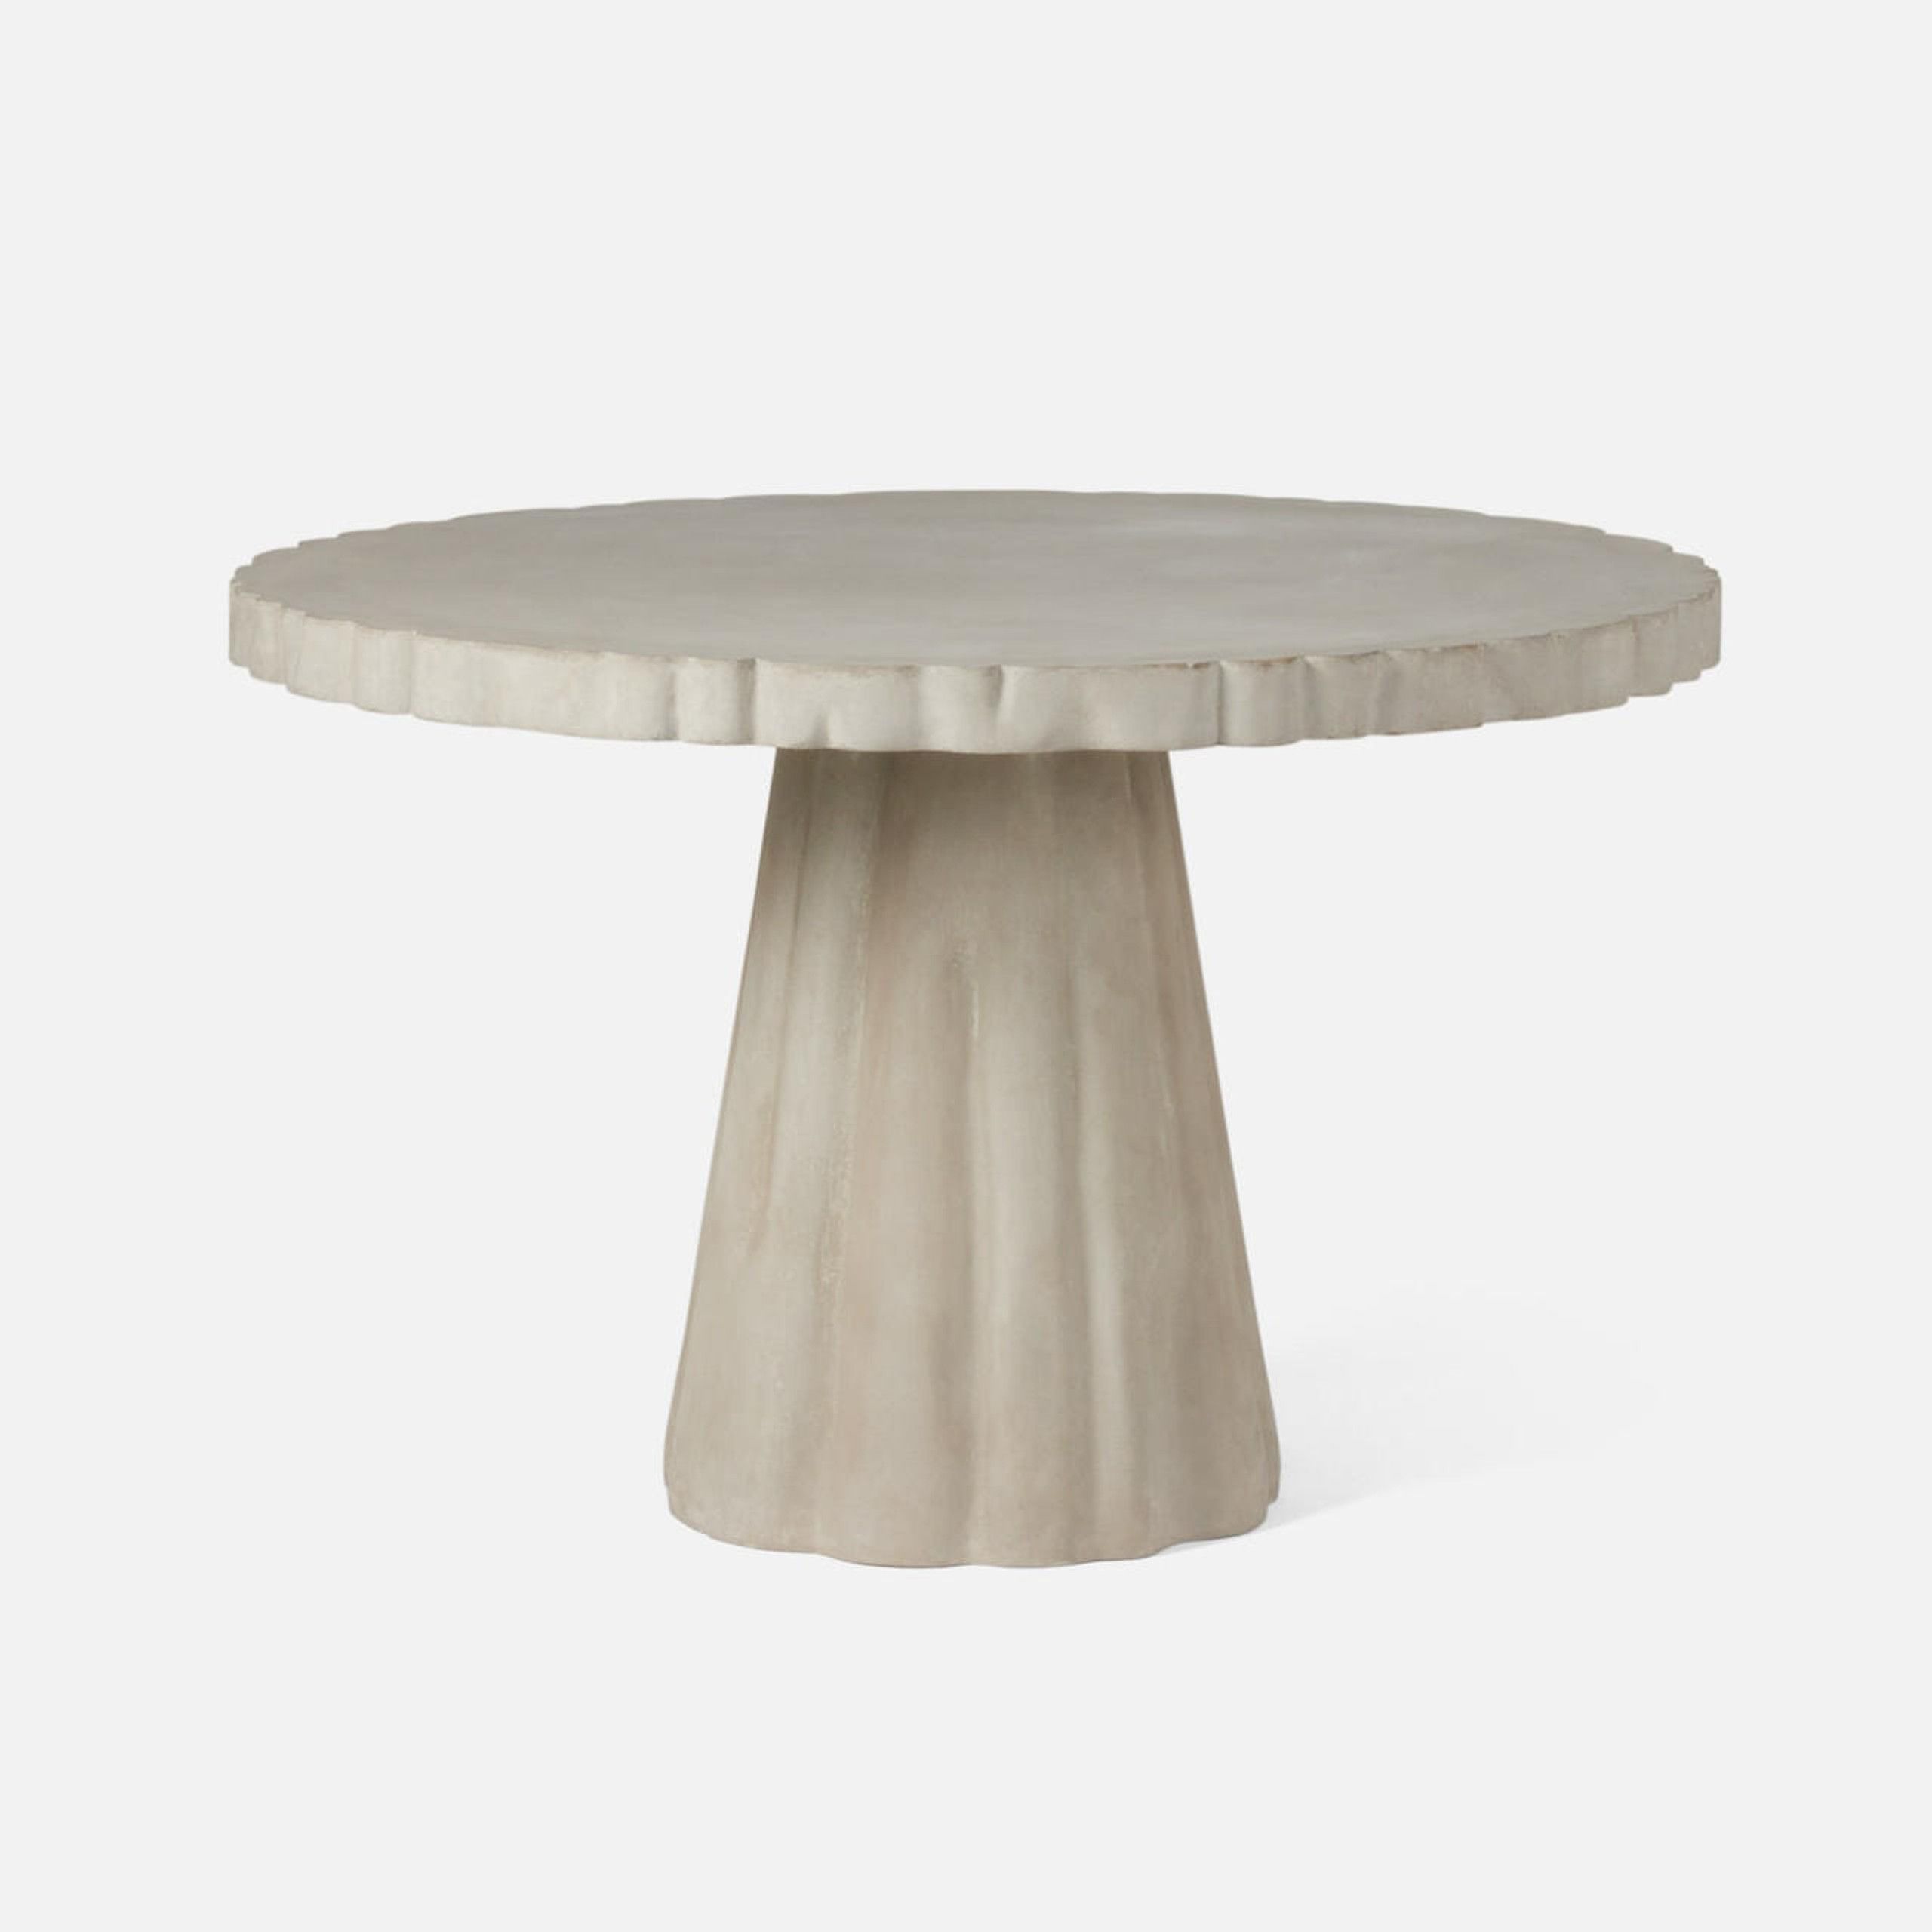 Grady Round Scalloped Dining Table
                    
    
        
    
    
        
        ... | Belle and June